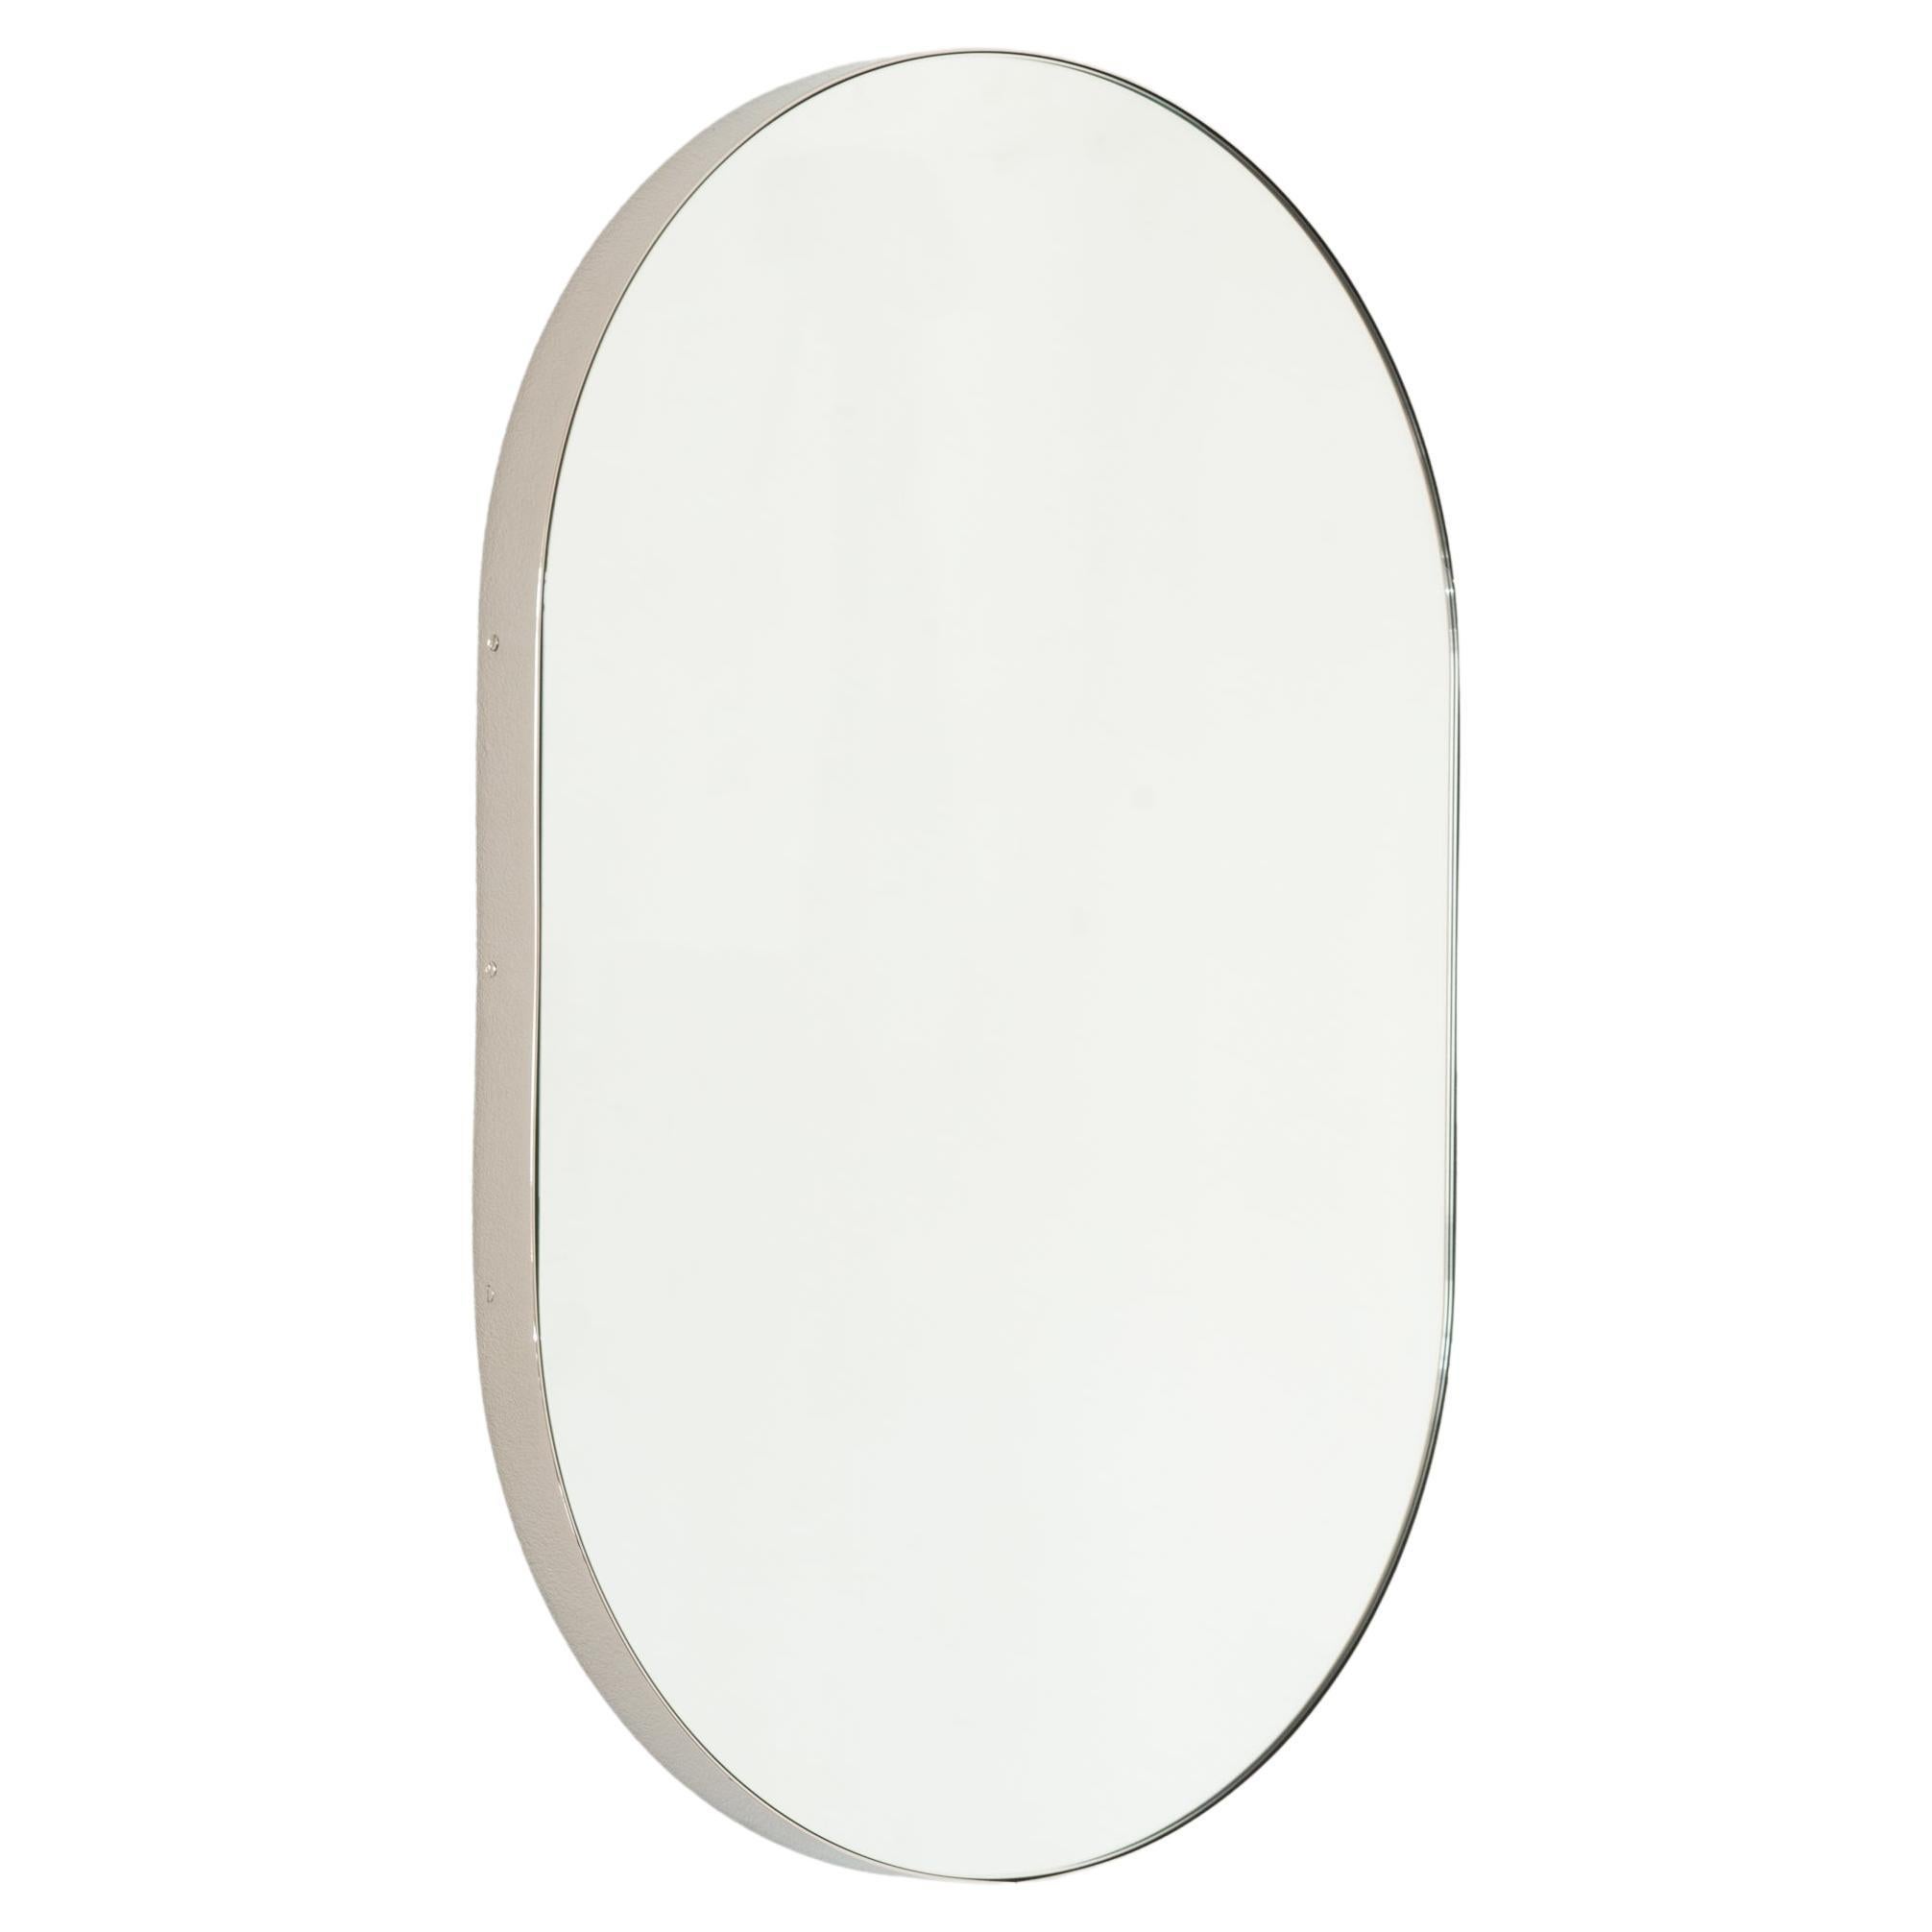 Capsula Pill Shaped Modern Mirror with Nickel Plated Frame, Medium For Sale